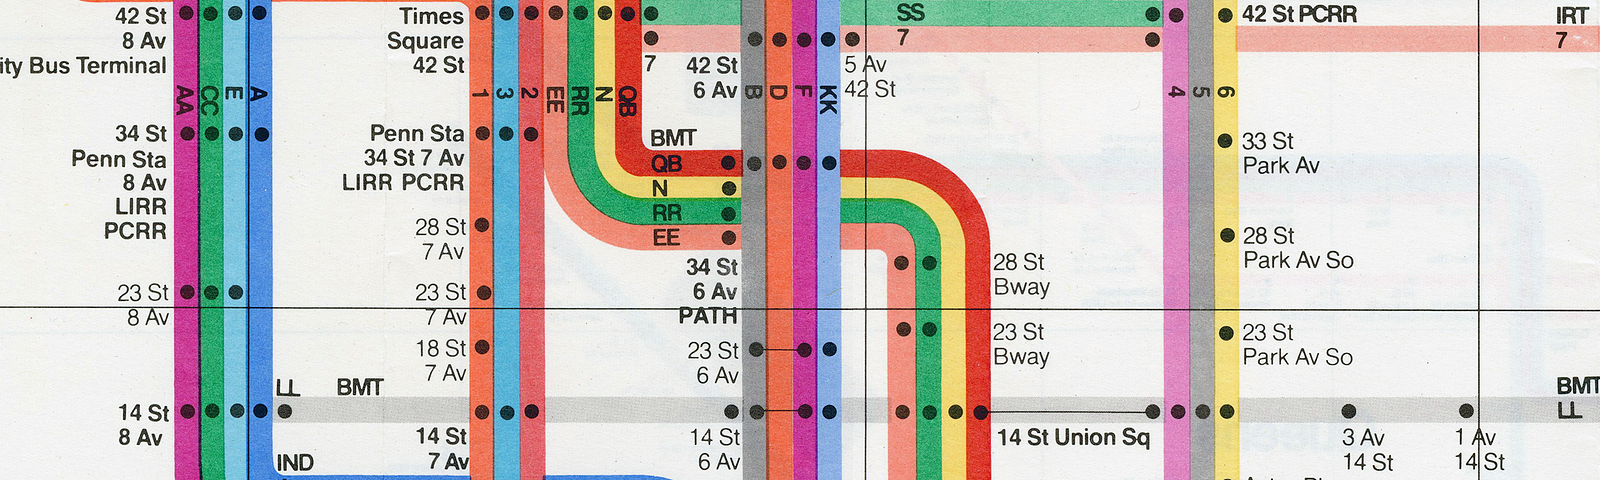 New York Subway Guide in 1972